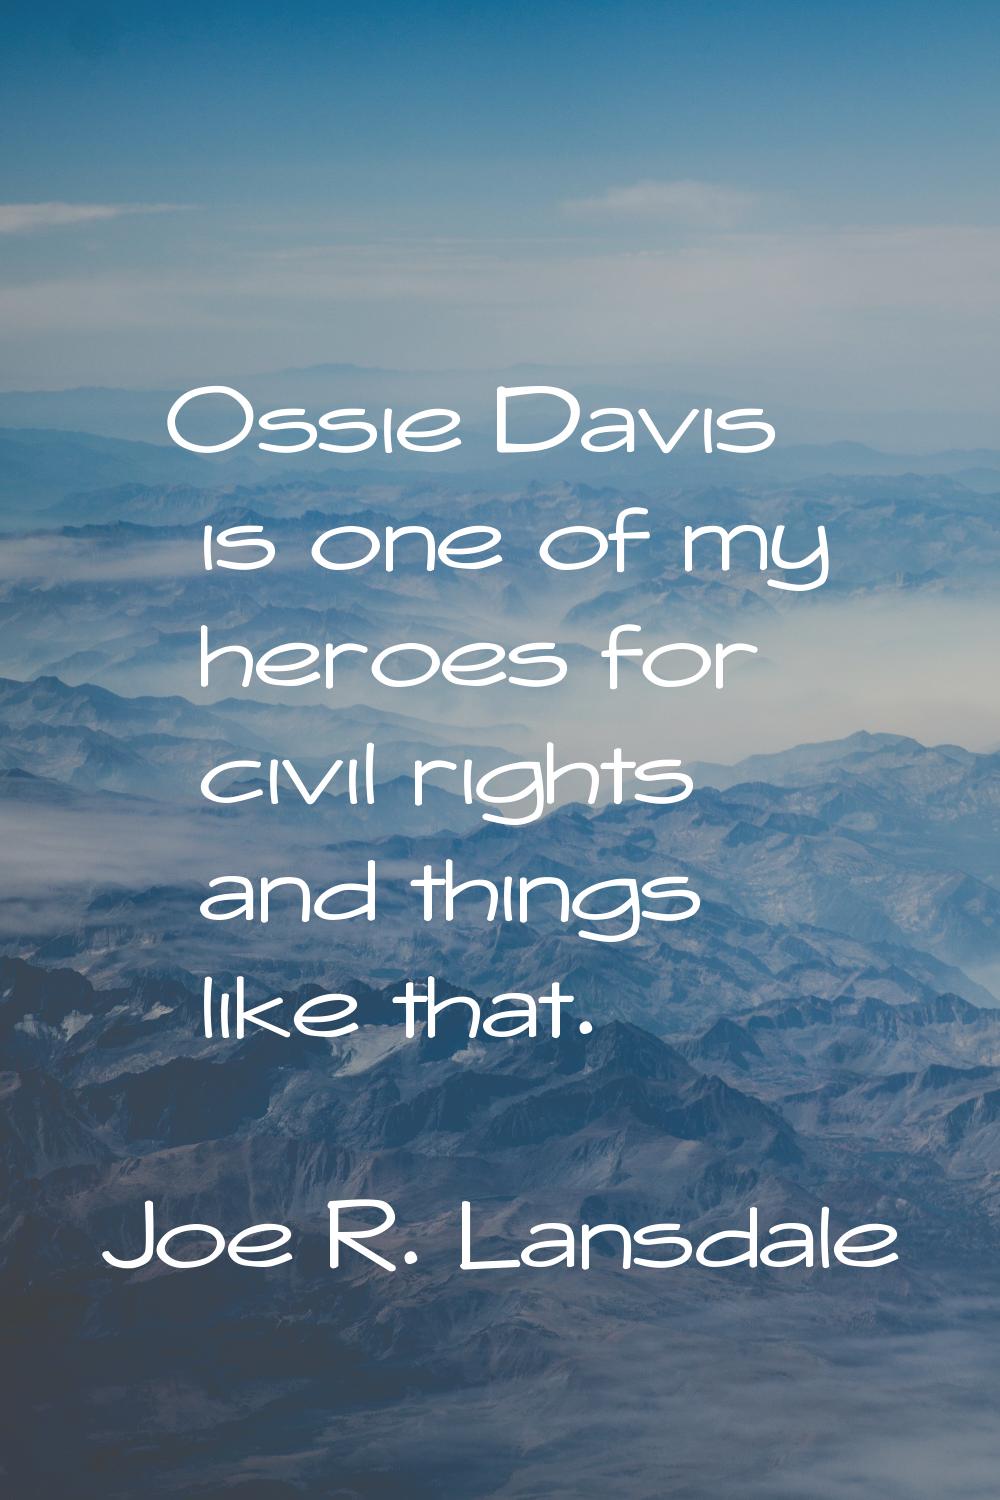 Ossie Davis is one of my heroes for civil rights and things like that.